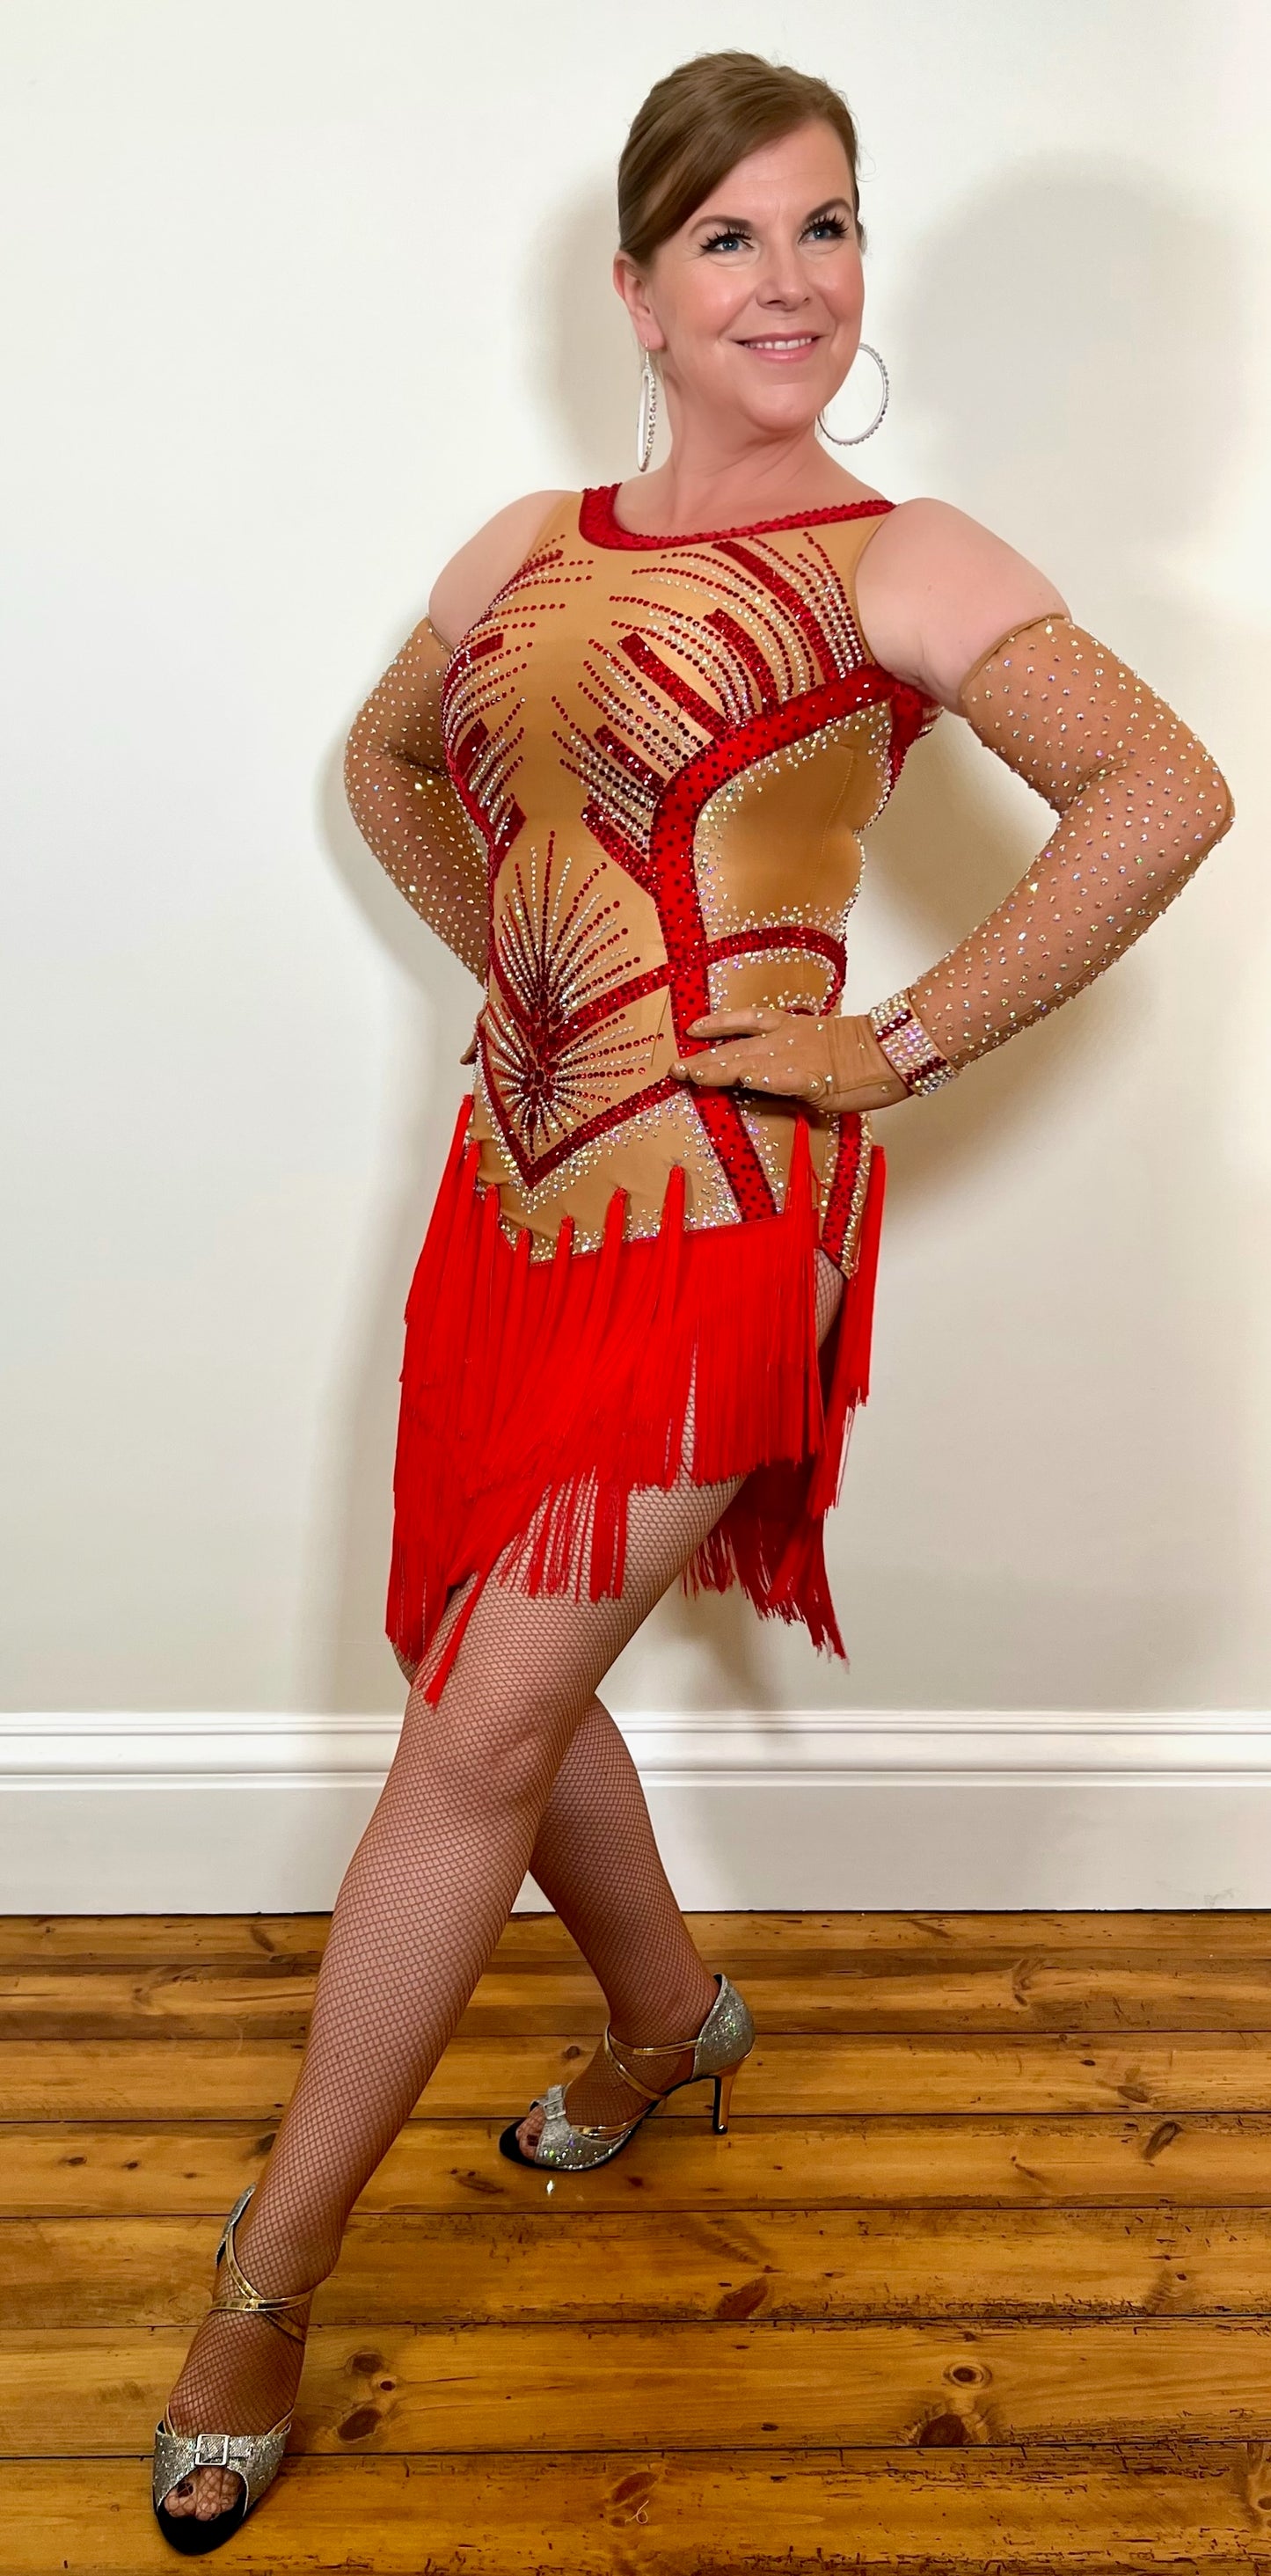 078 Red & Nude Latin Dress. Structured bodice design with red fringed skirt. Stoned in Siam & AB